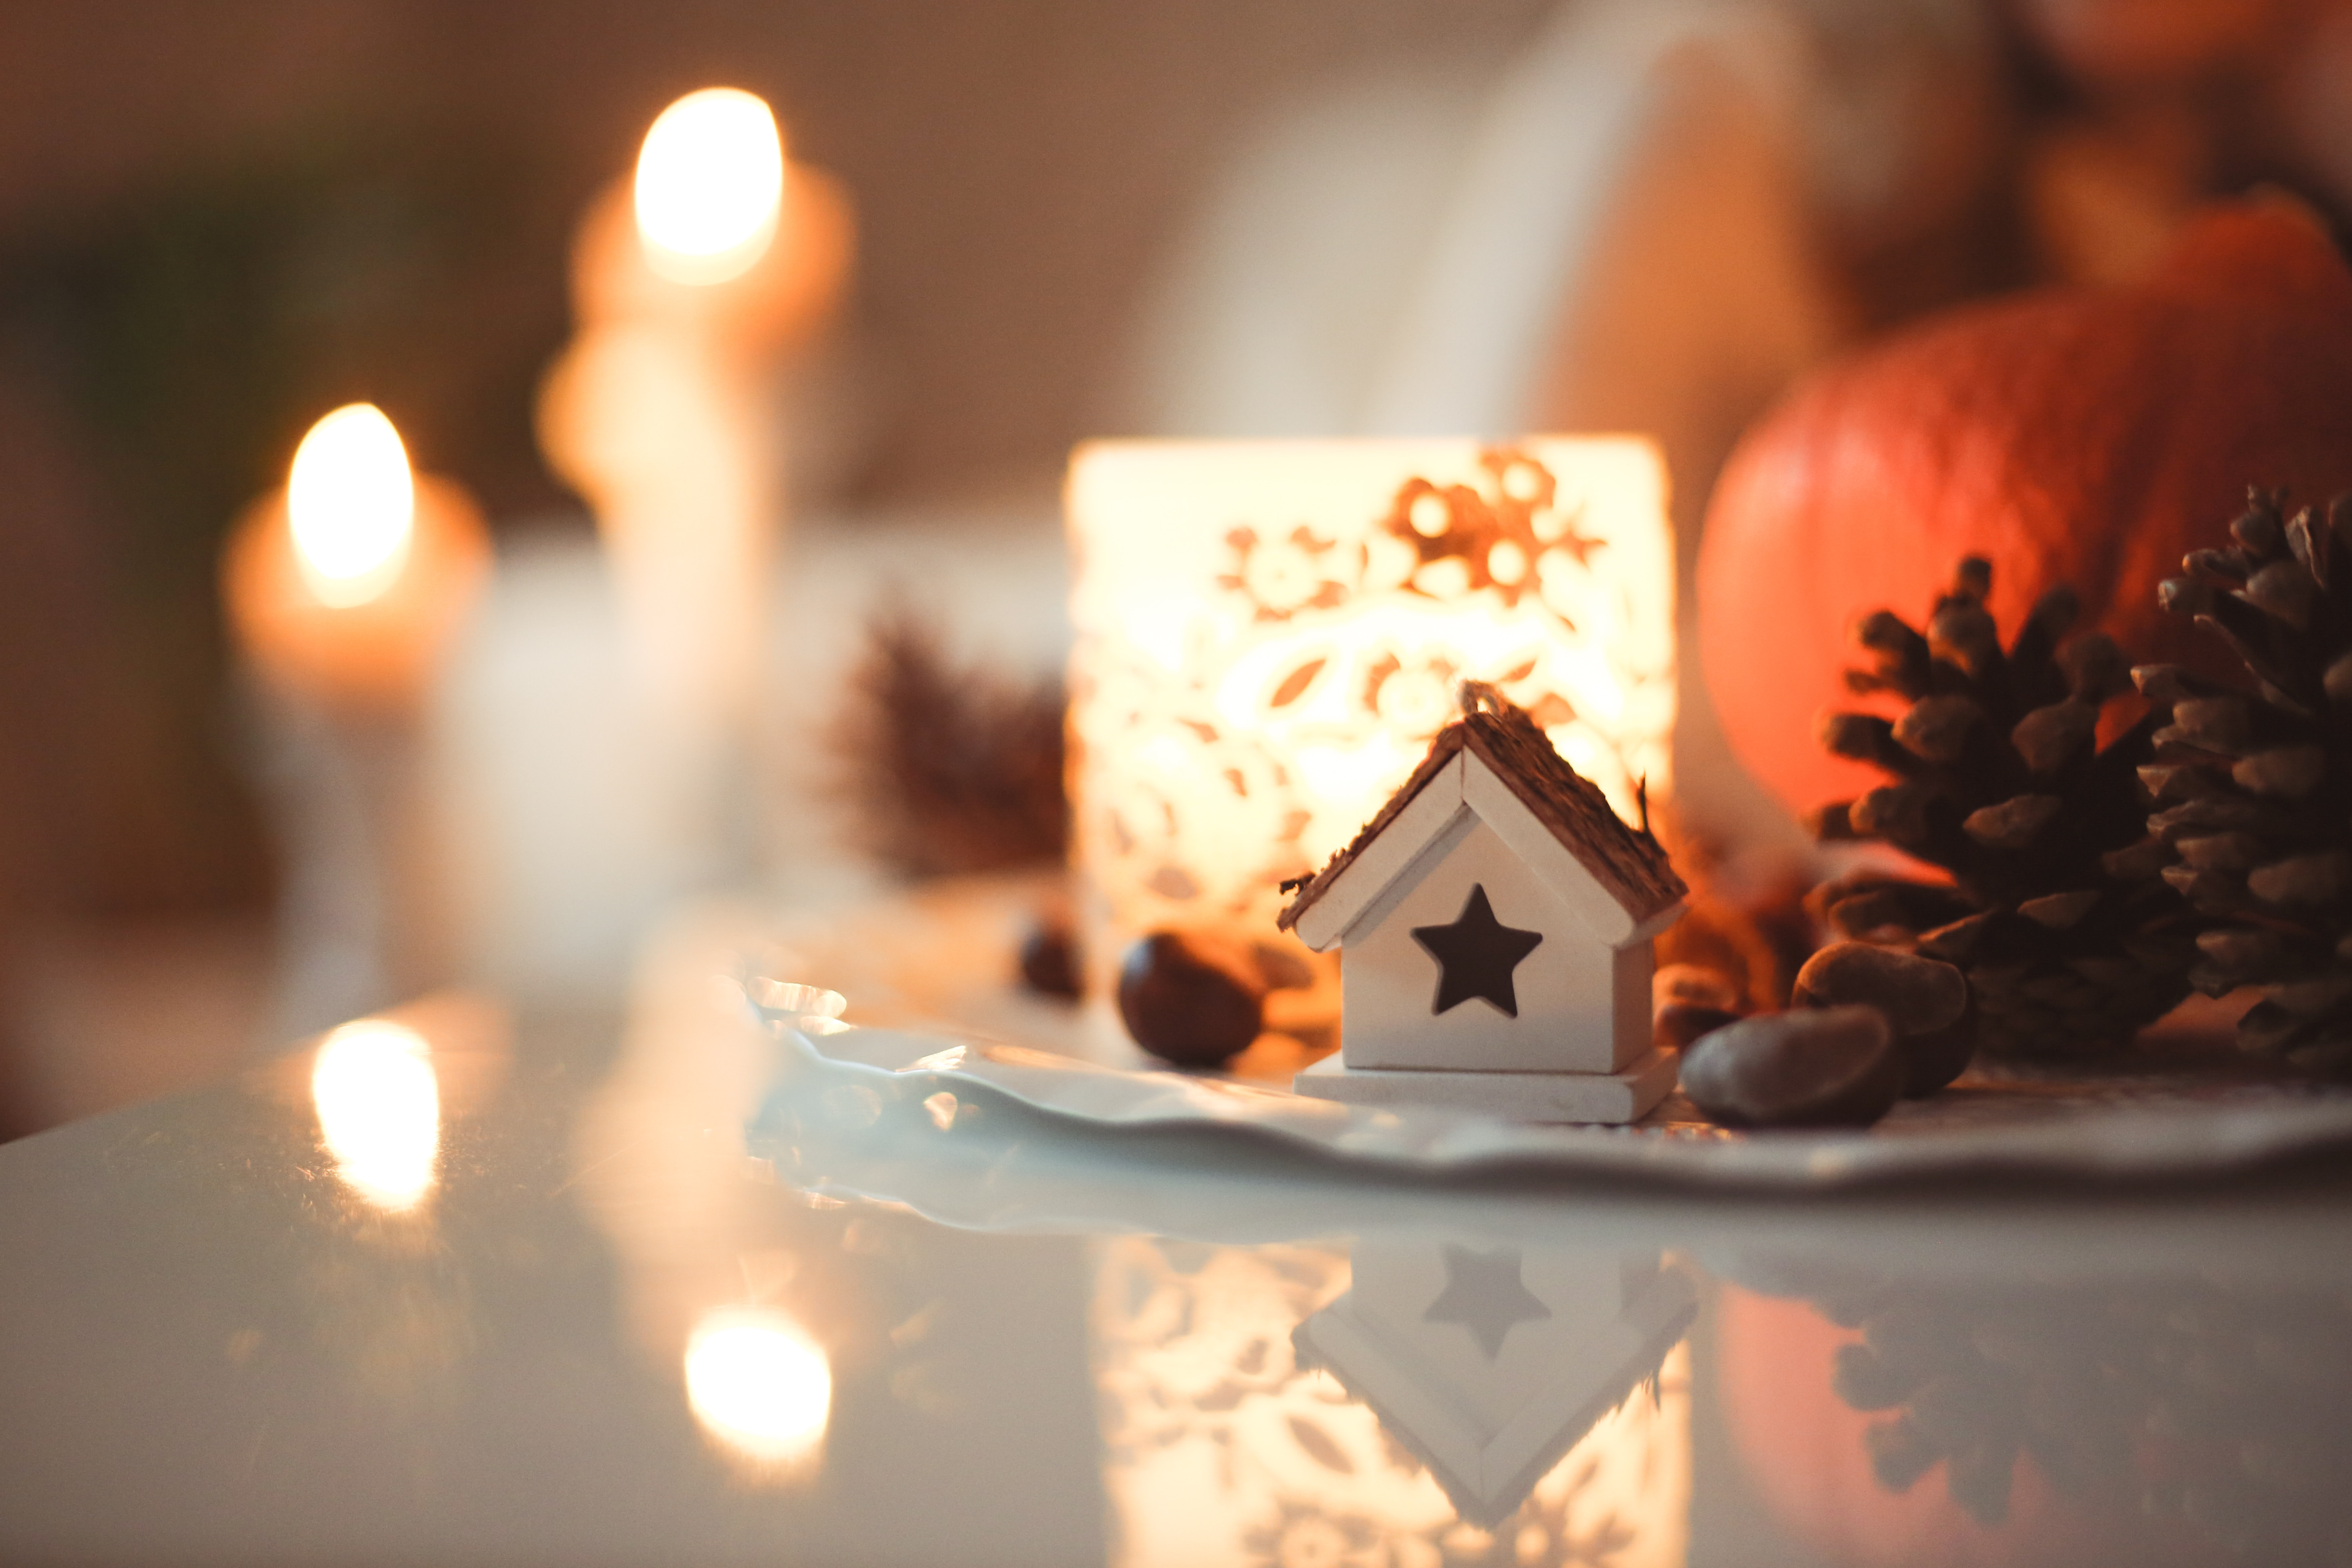 White ceramic house, grouped with pinecones and backlit by a candle